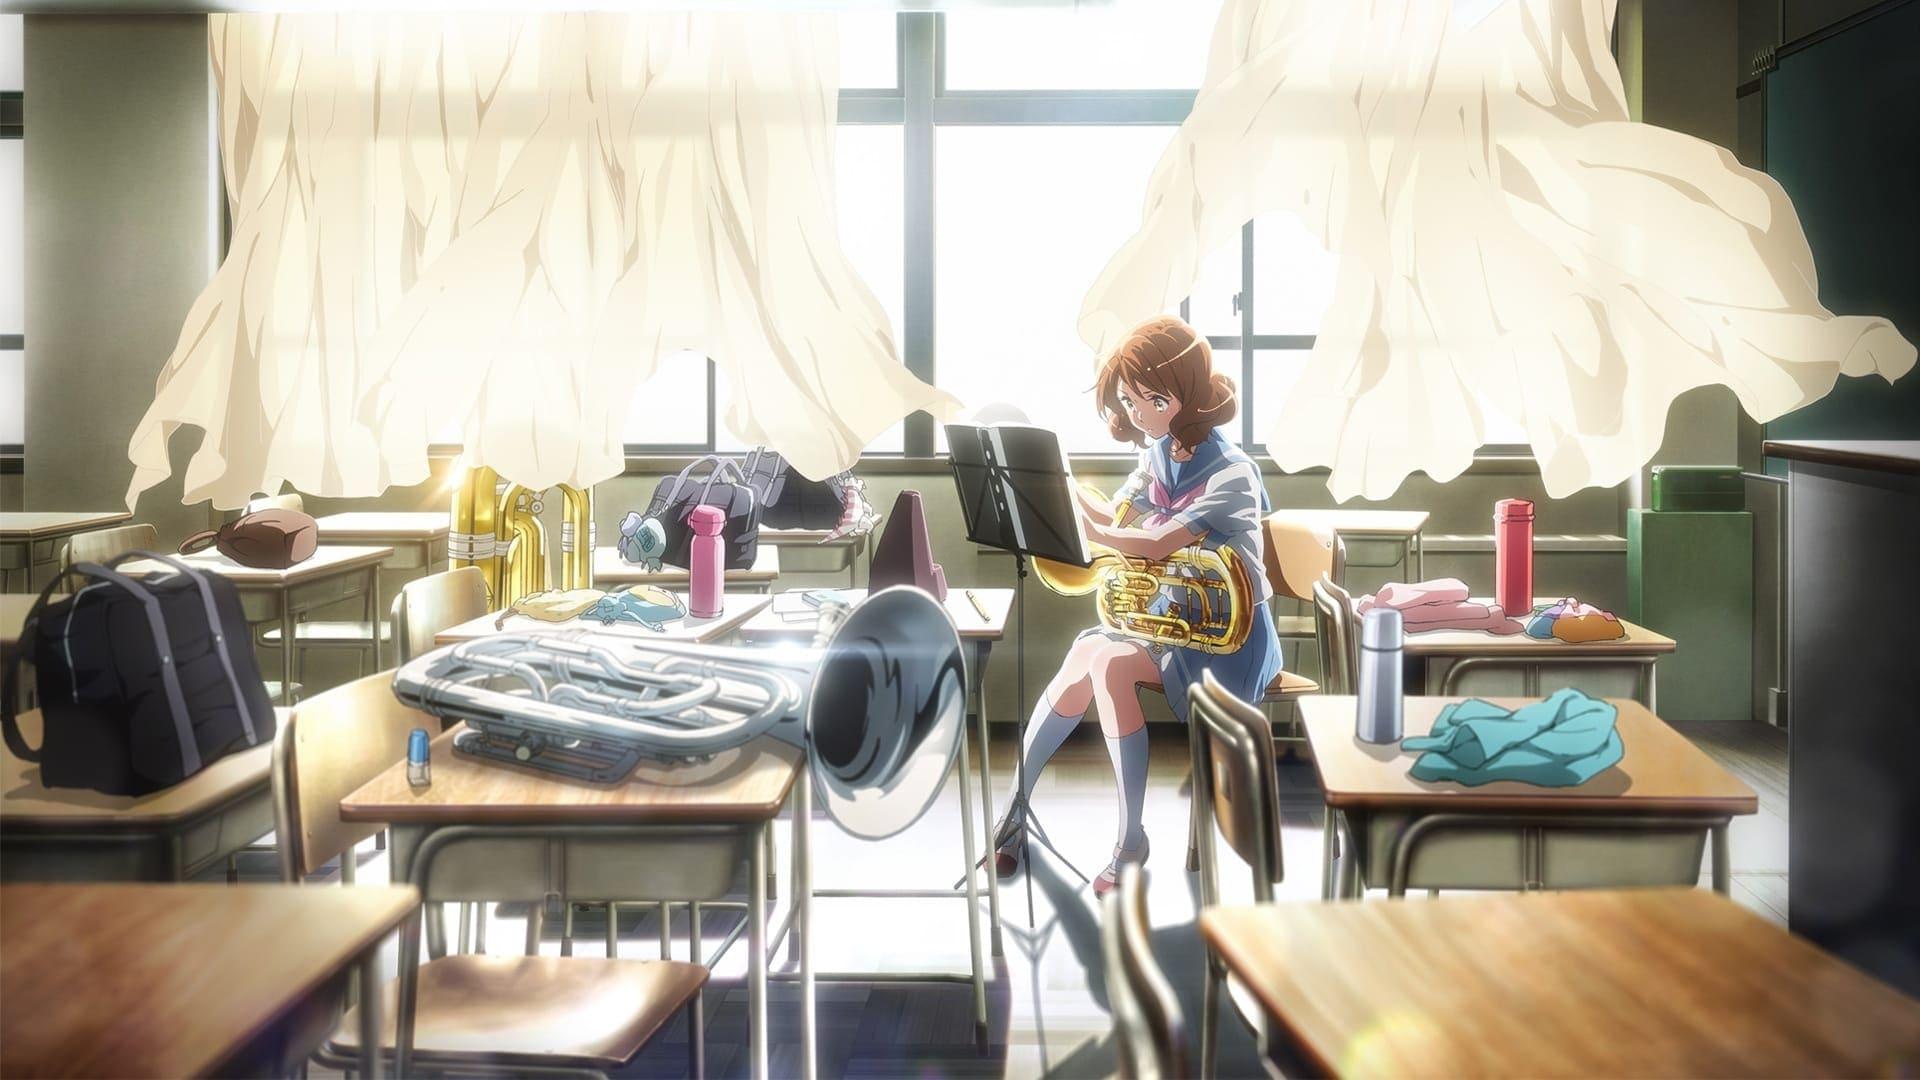 Sound! Euphonium the Movie – Welcome to the Kitauji High School Concert Band backdrop